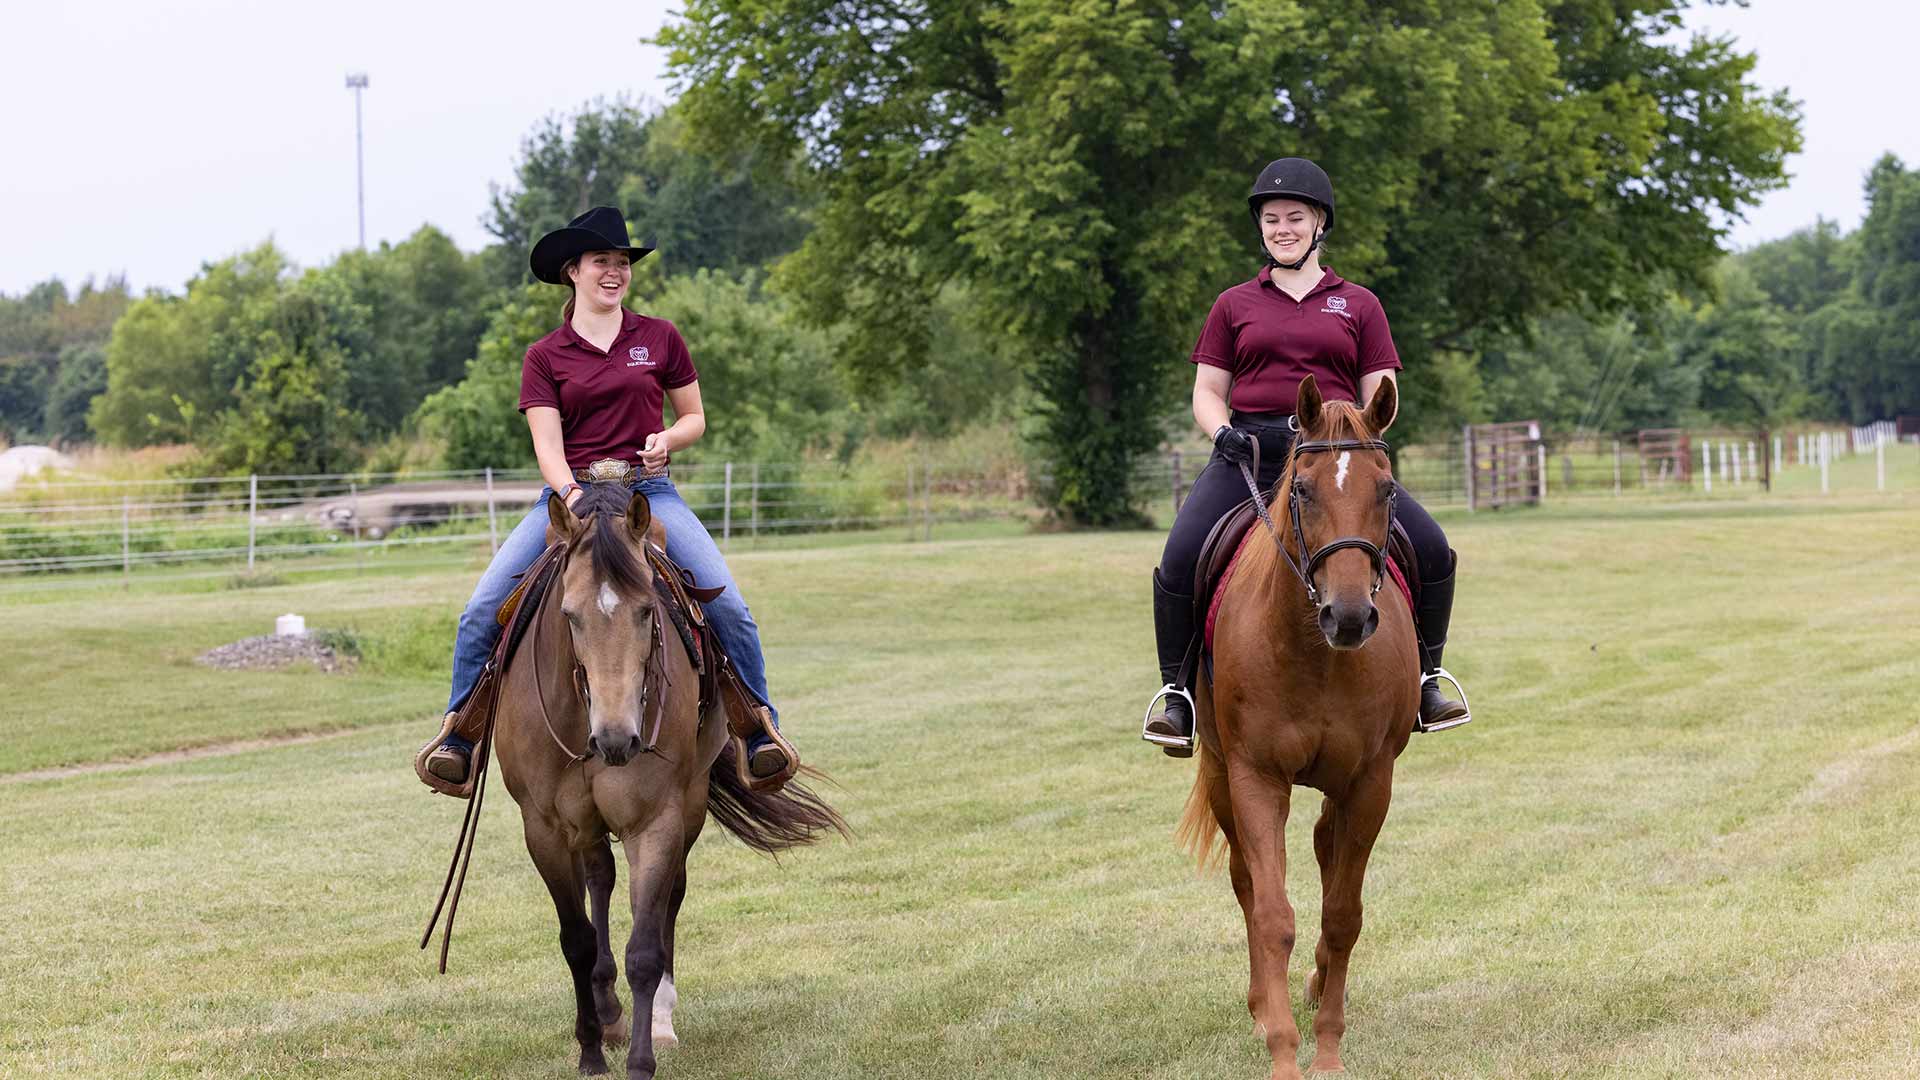 Two equine students riding their horses at Darr Agricultural Center.